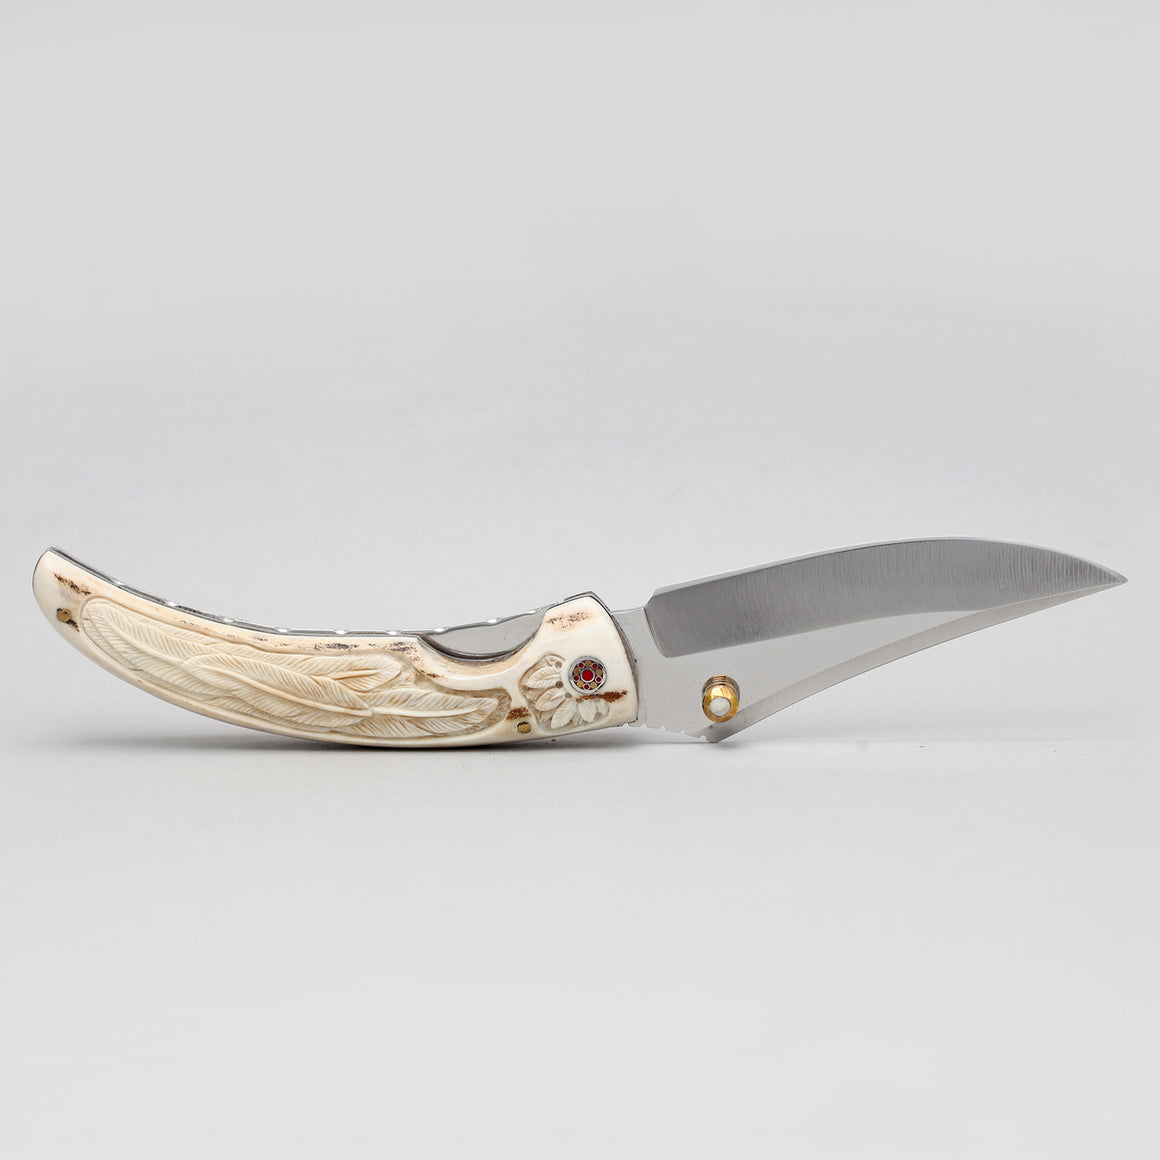 JAPANESE STEEL KNIFE WITH FEATHER ETCHING